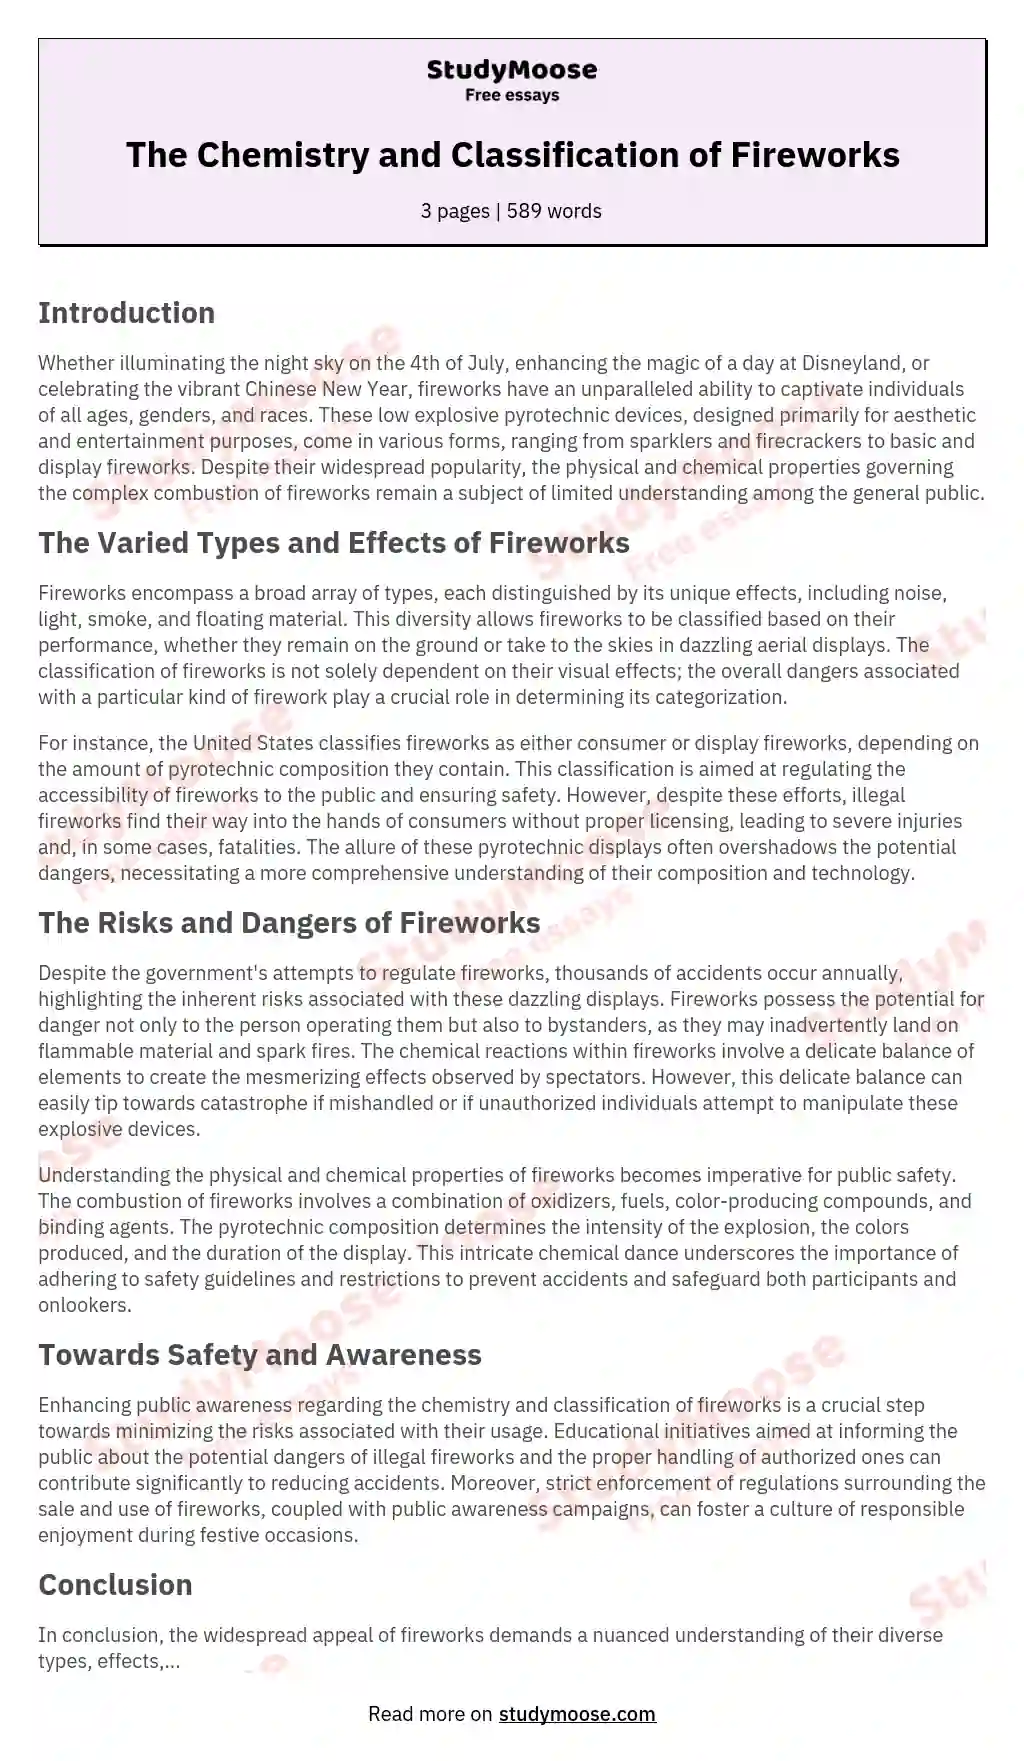 The Chemistry and Classification of Fireworks essay